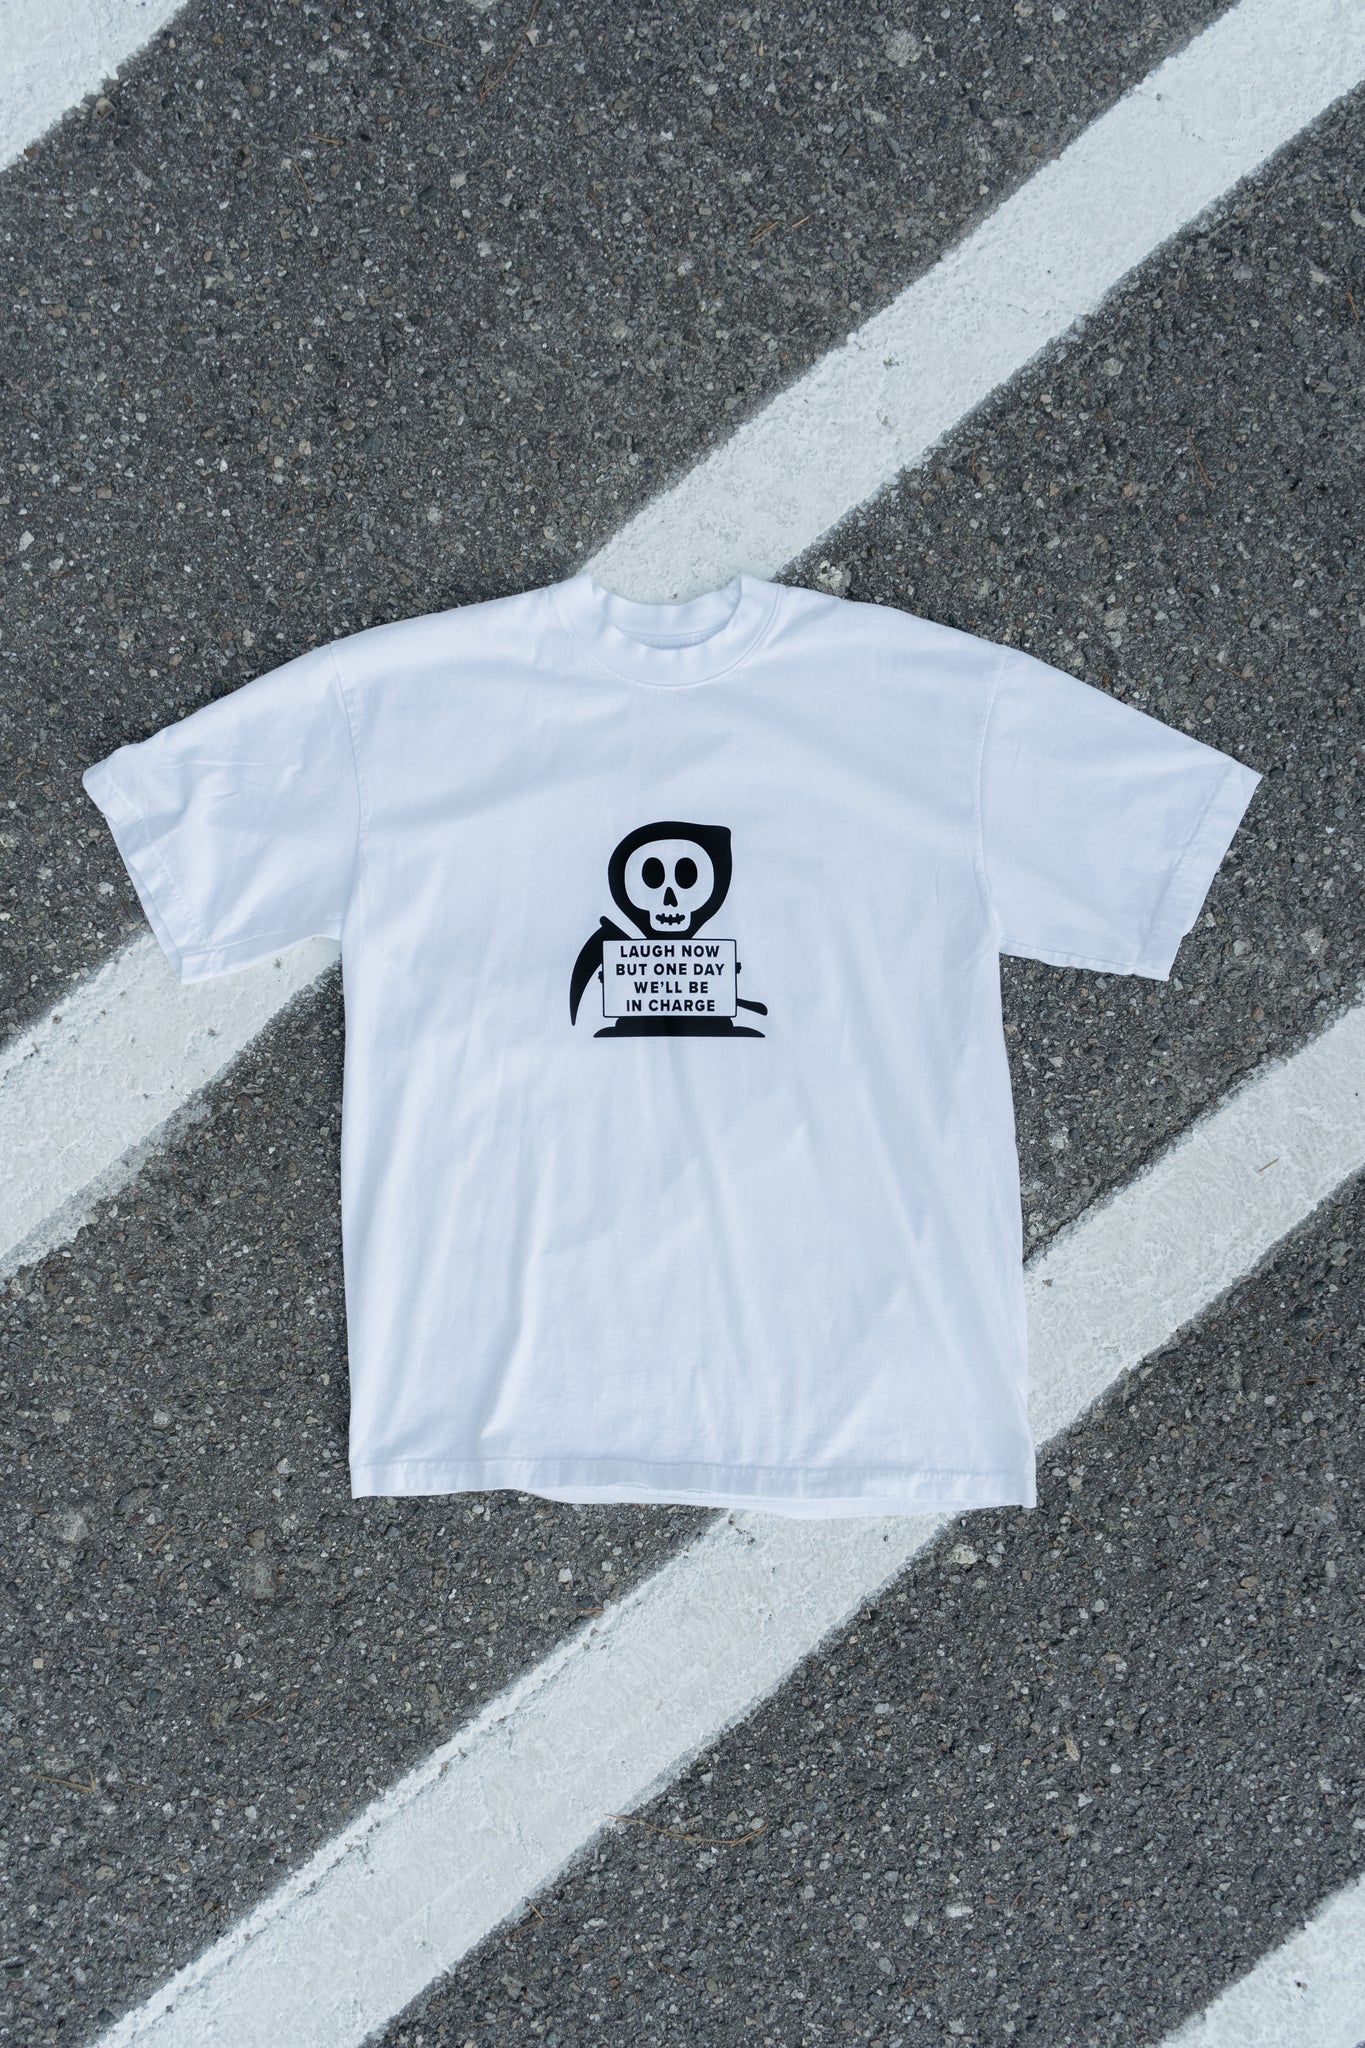 "One Day We'll Be in Charge" White Tee